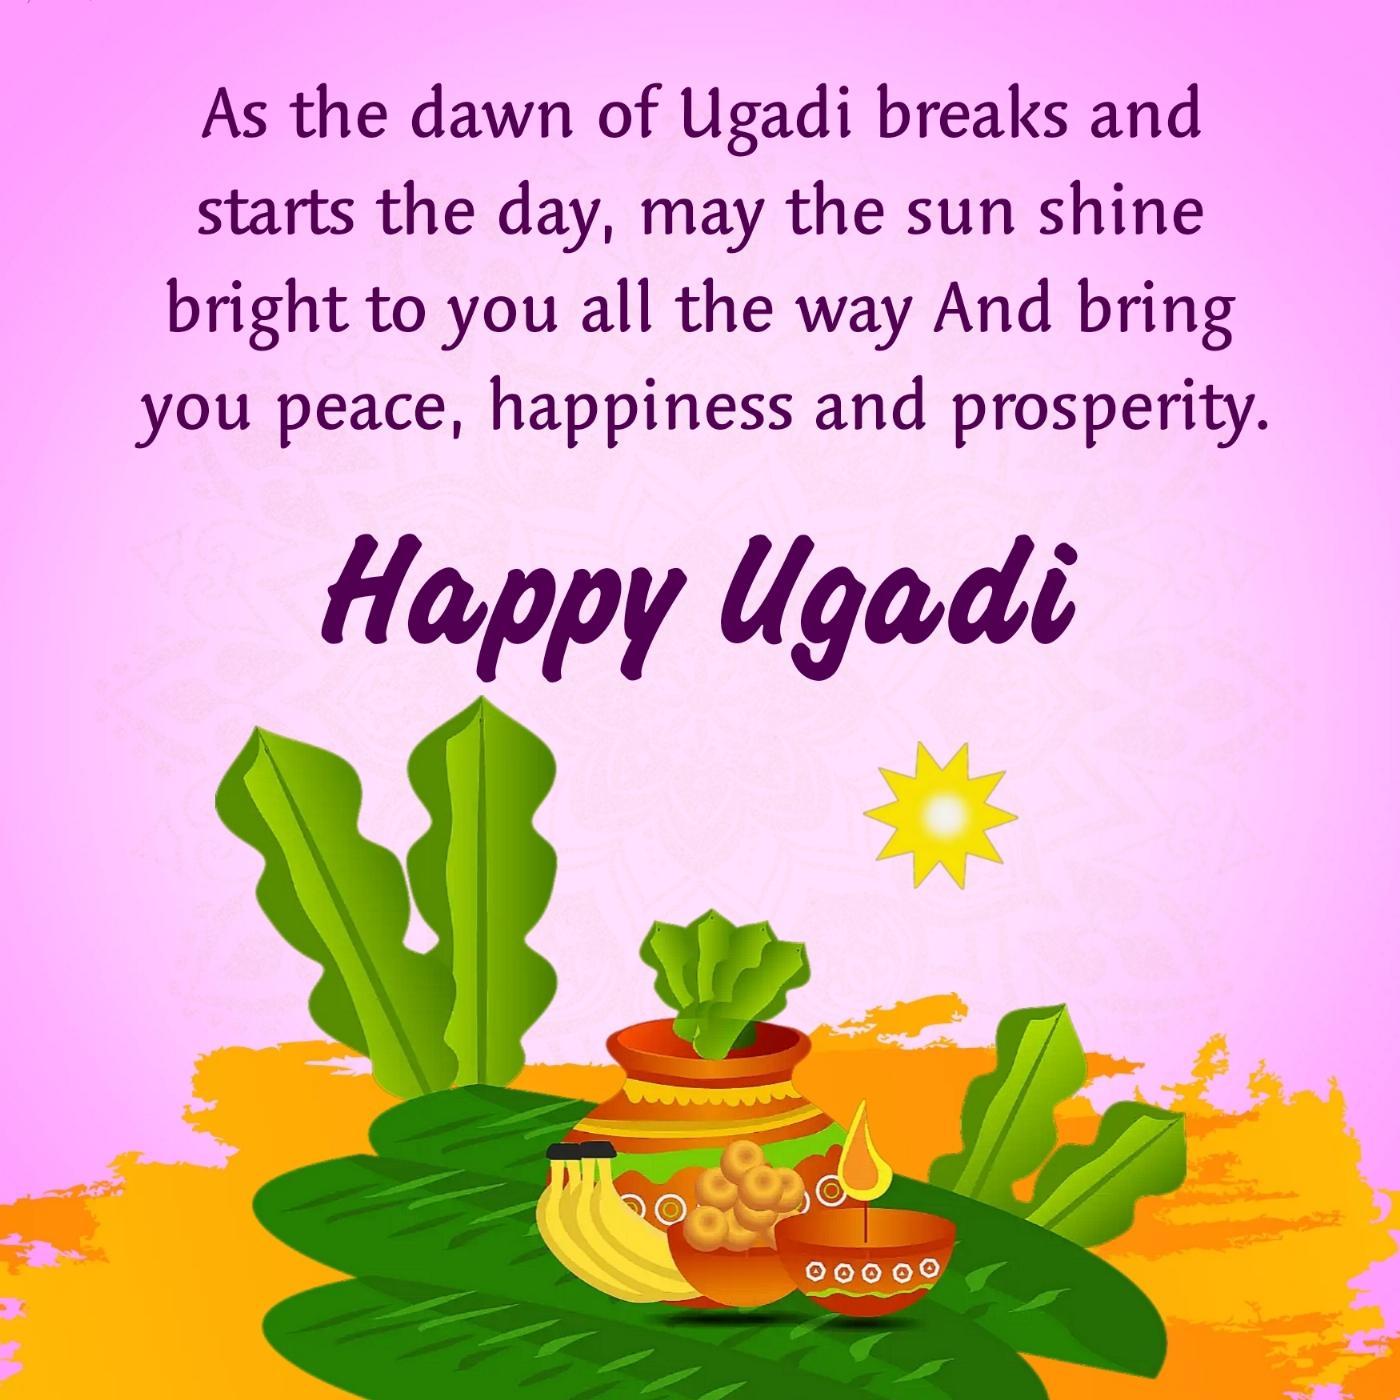 As the dawn of Ugadi breaks and starts the day